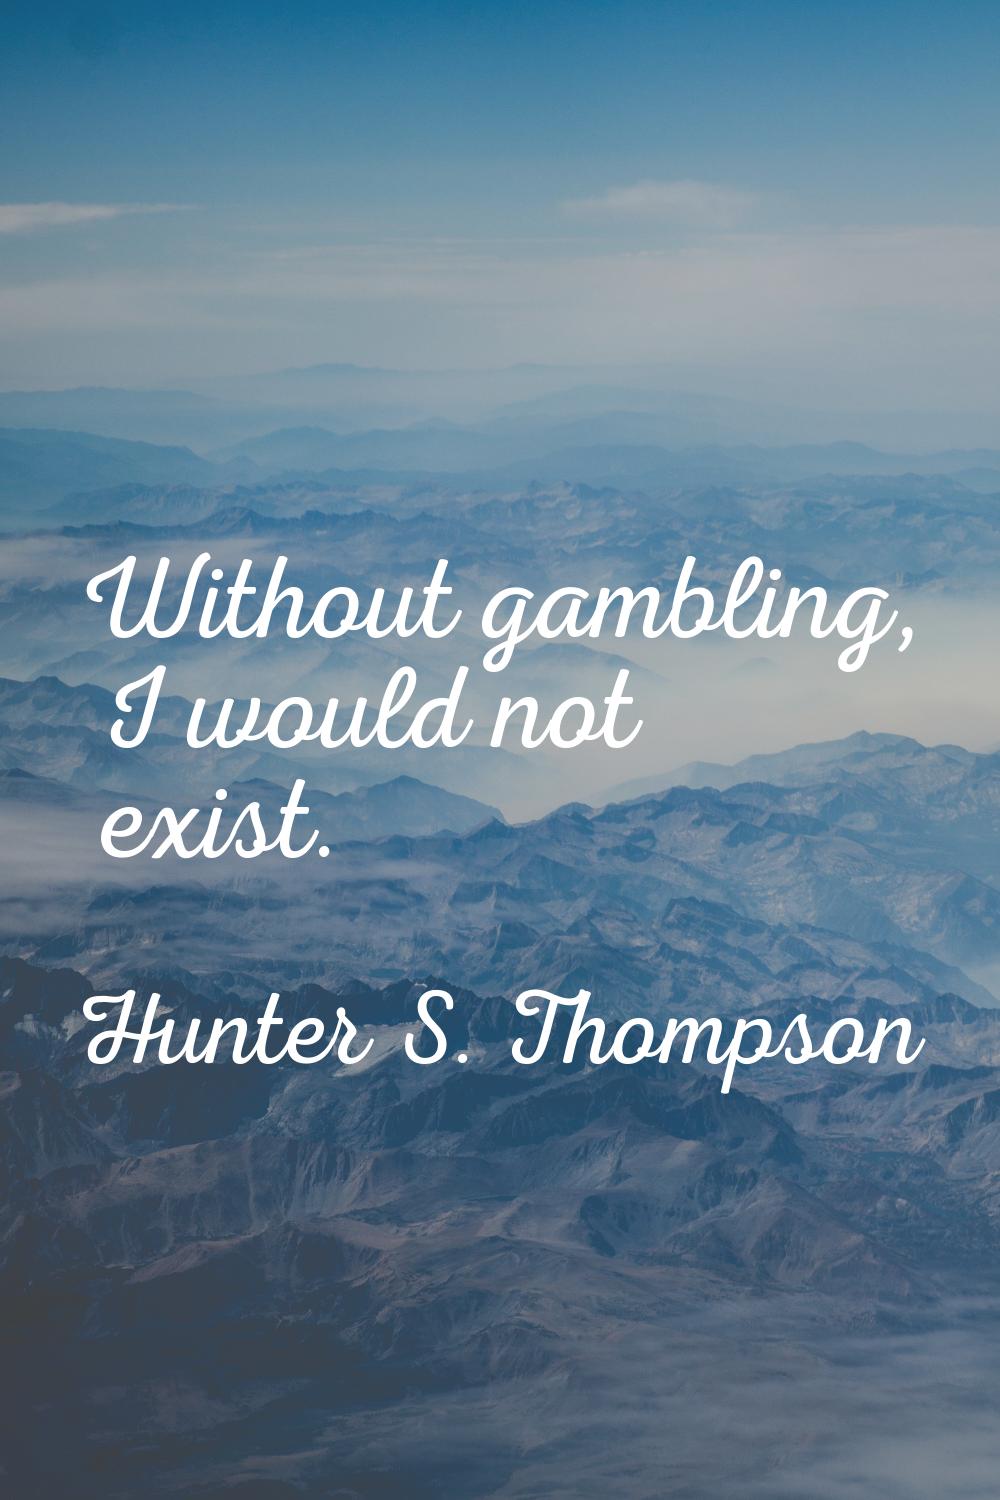 Without gambling, I would not exist.